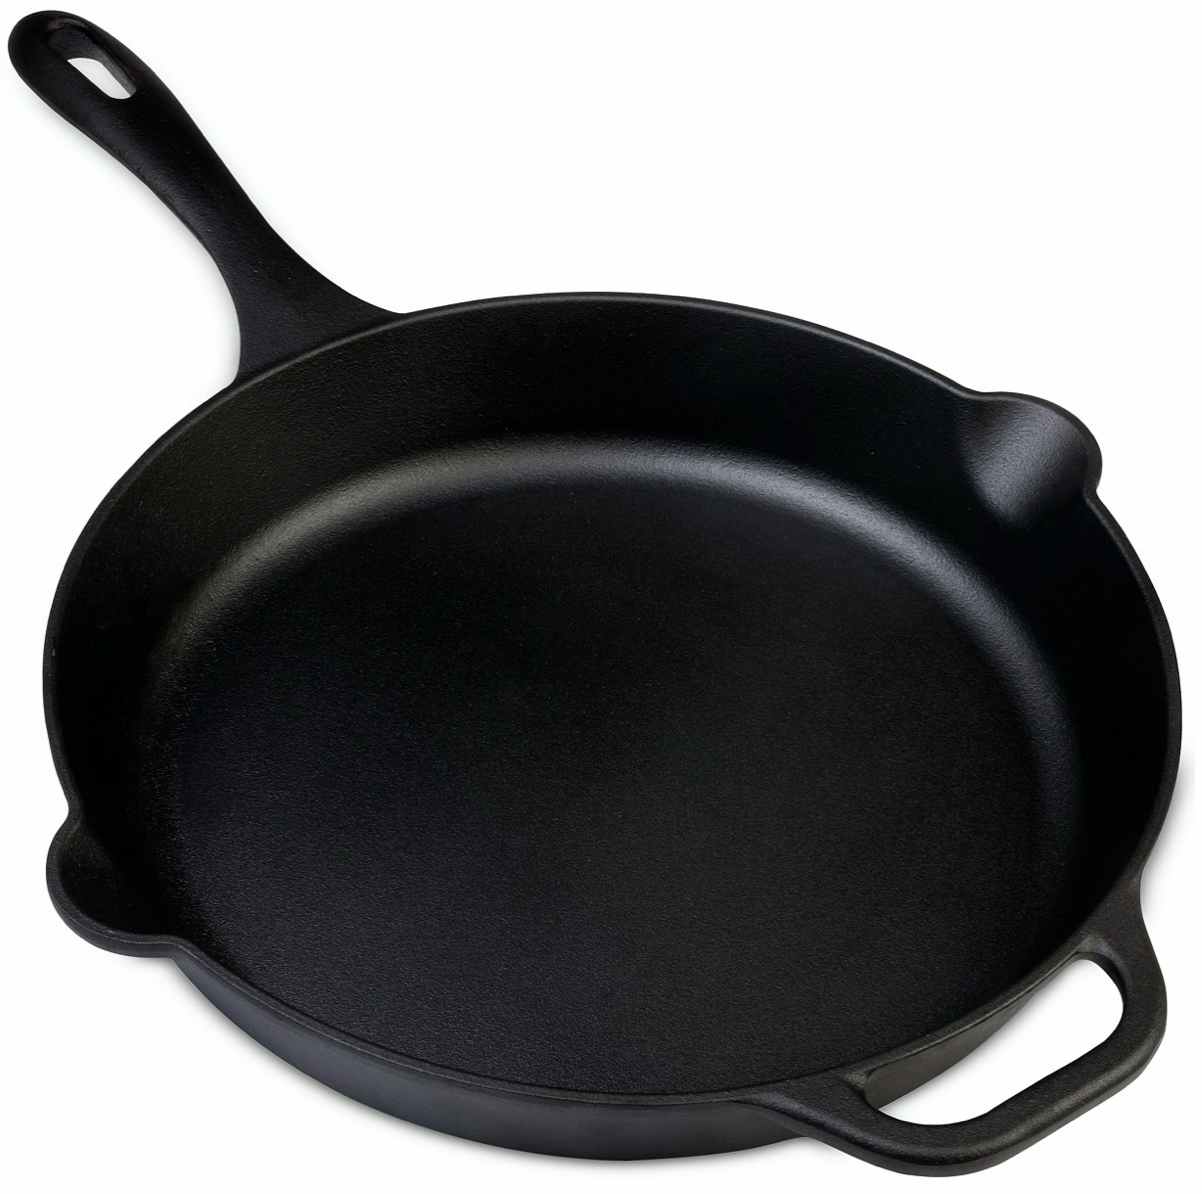 Cast Iron Skillet from Macy's